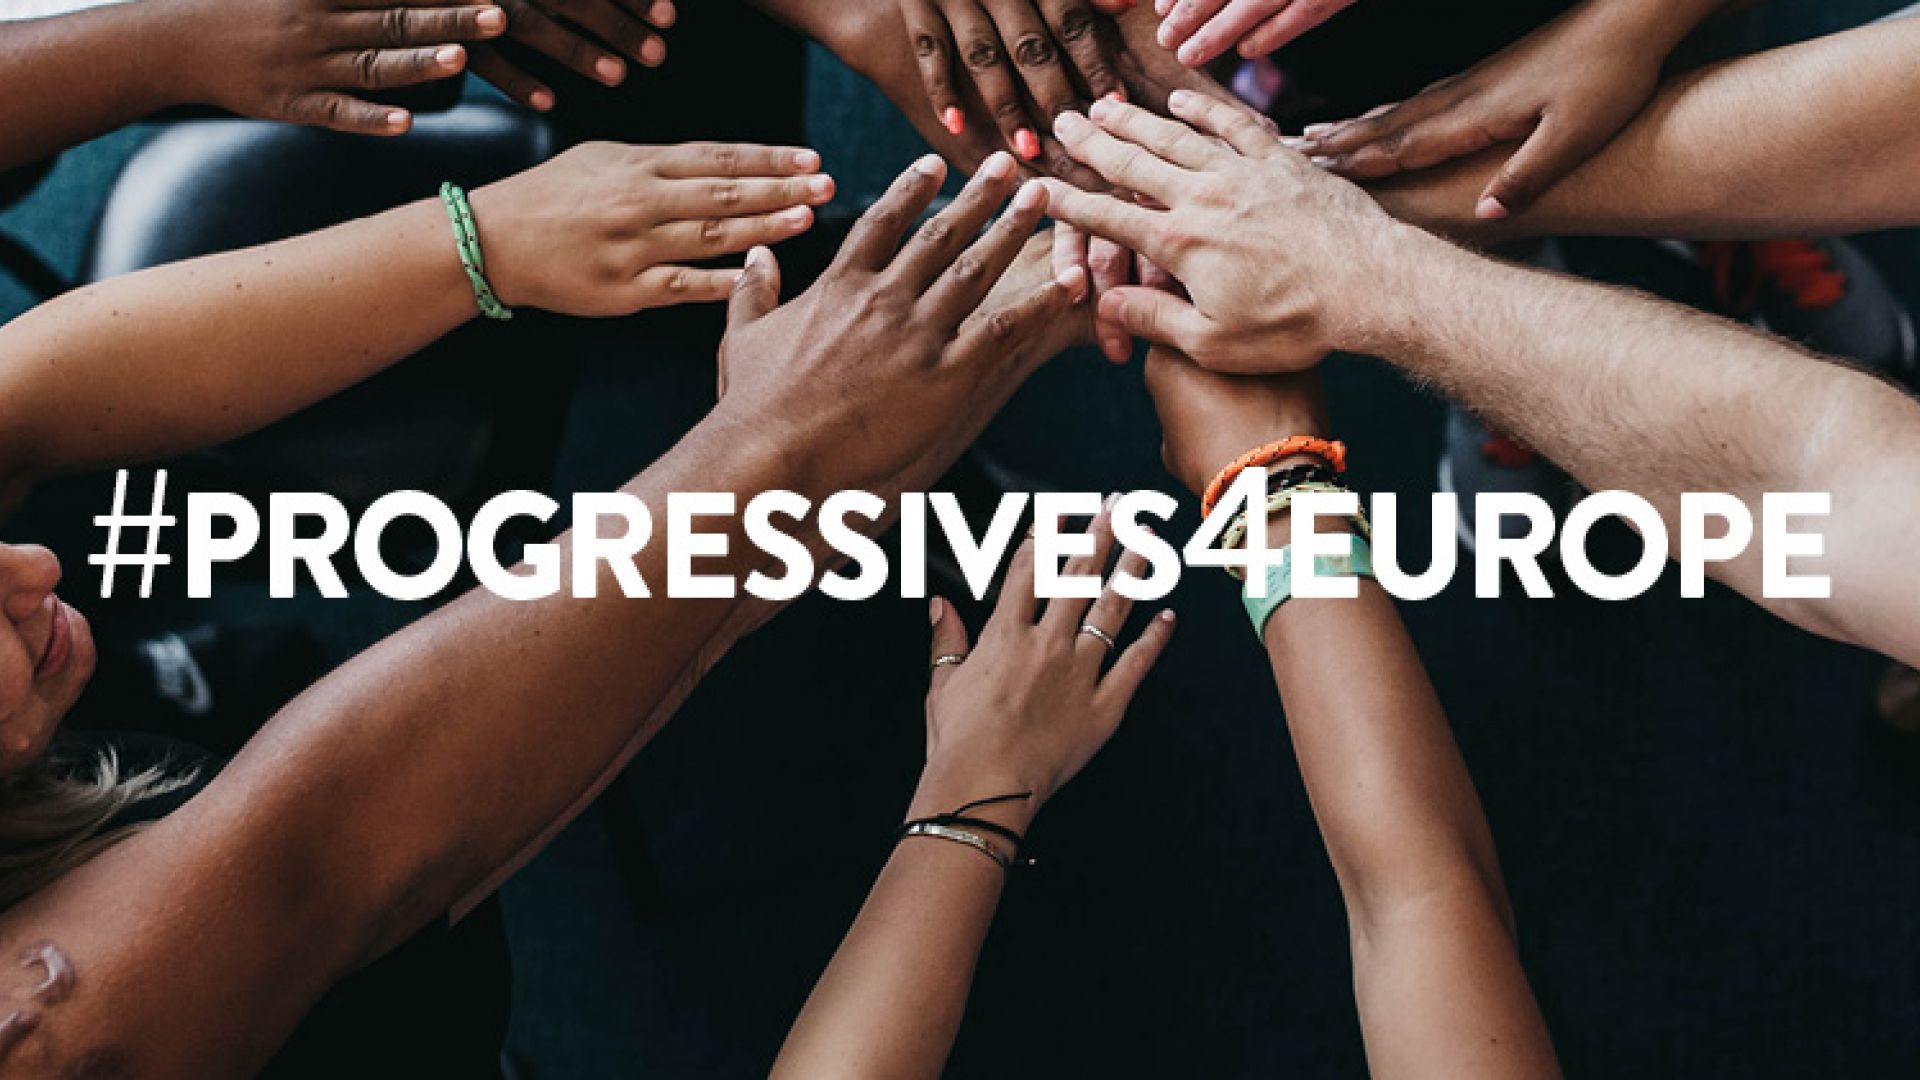 Conference on the future of Europe #Progressives4Europe